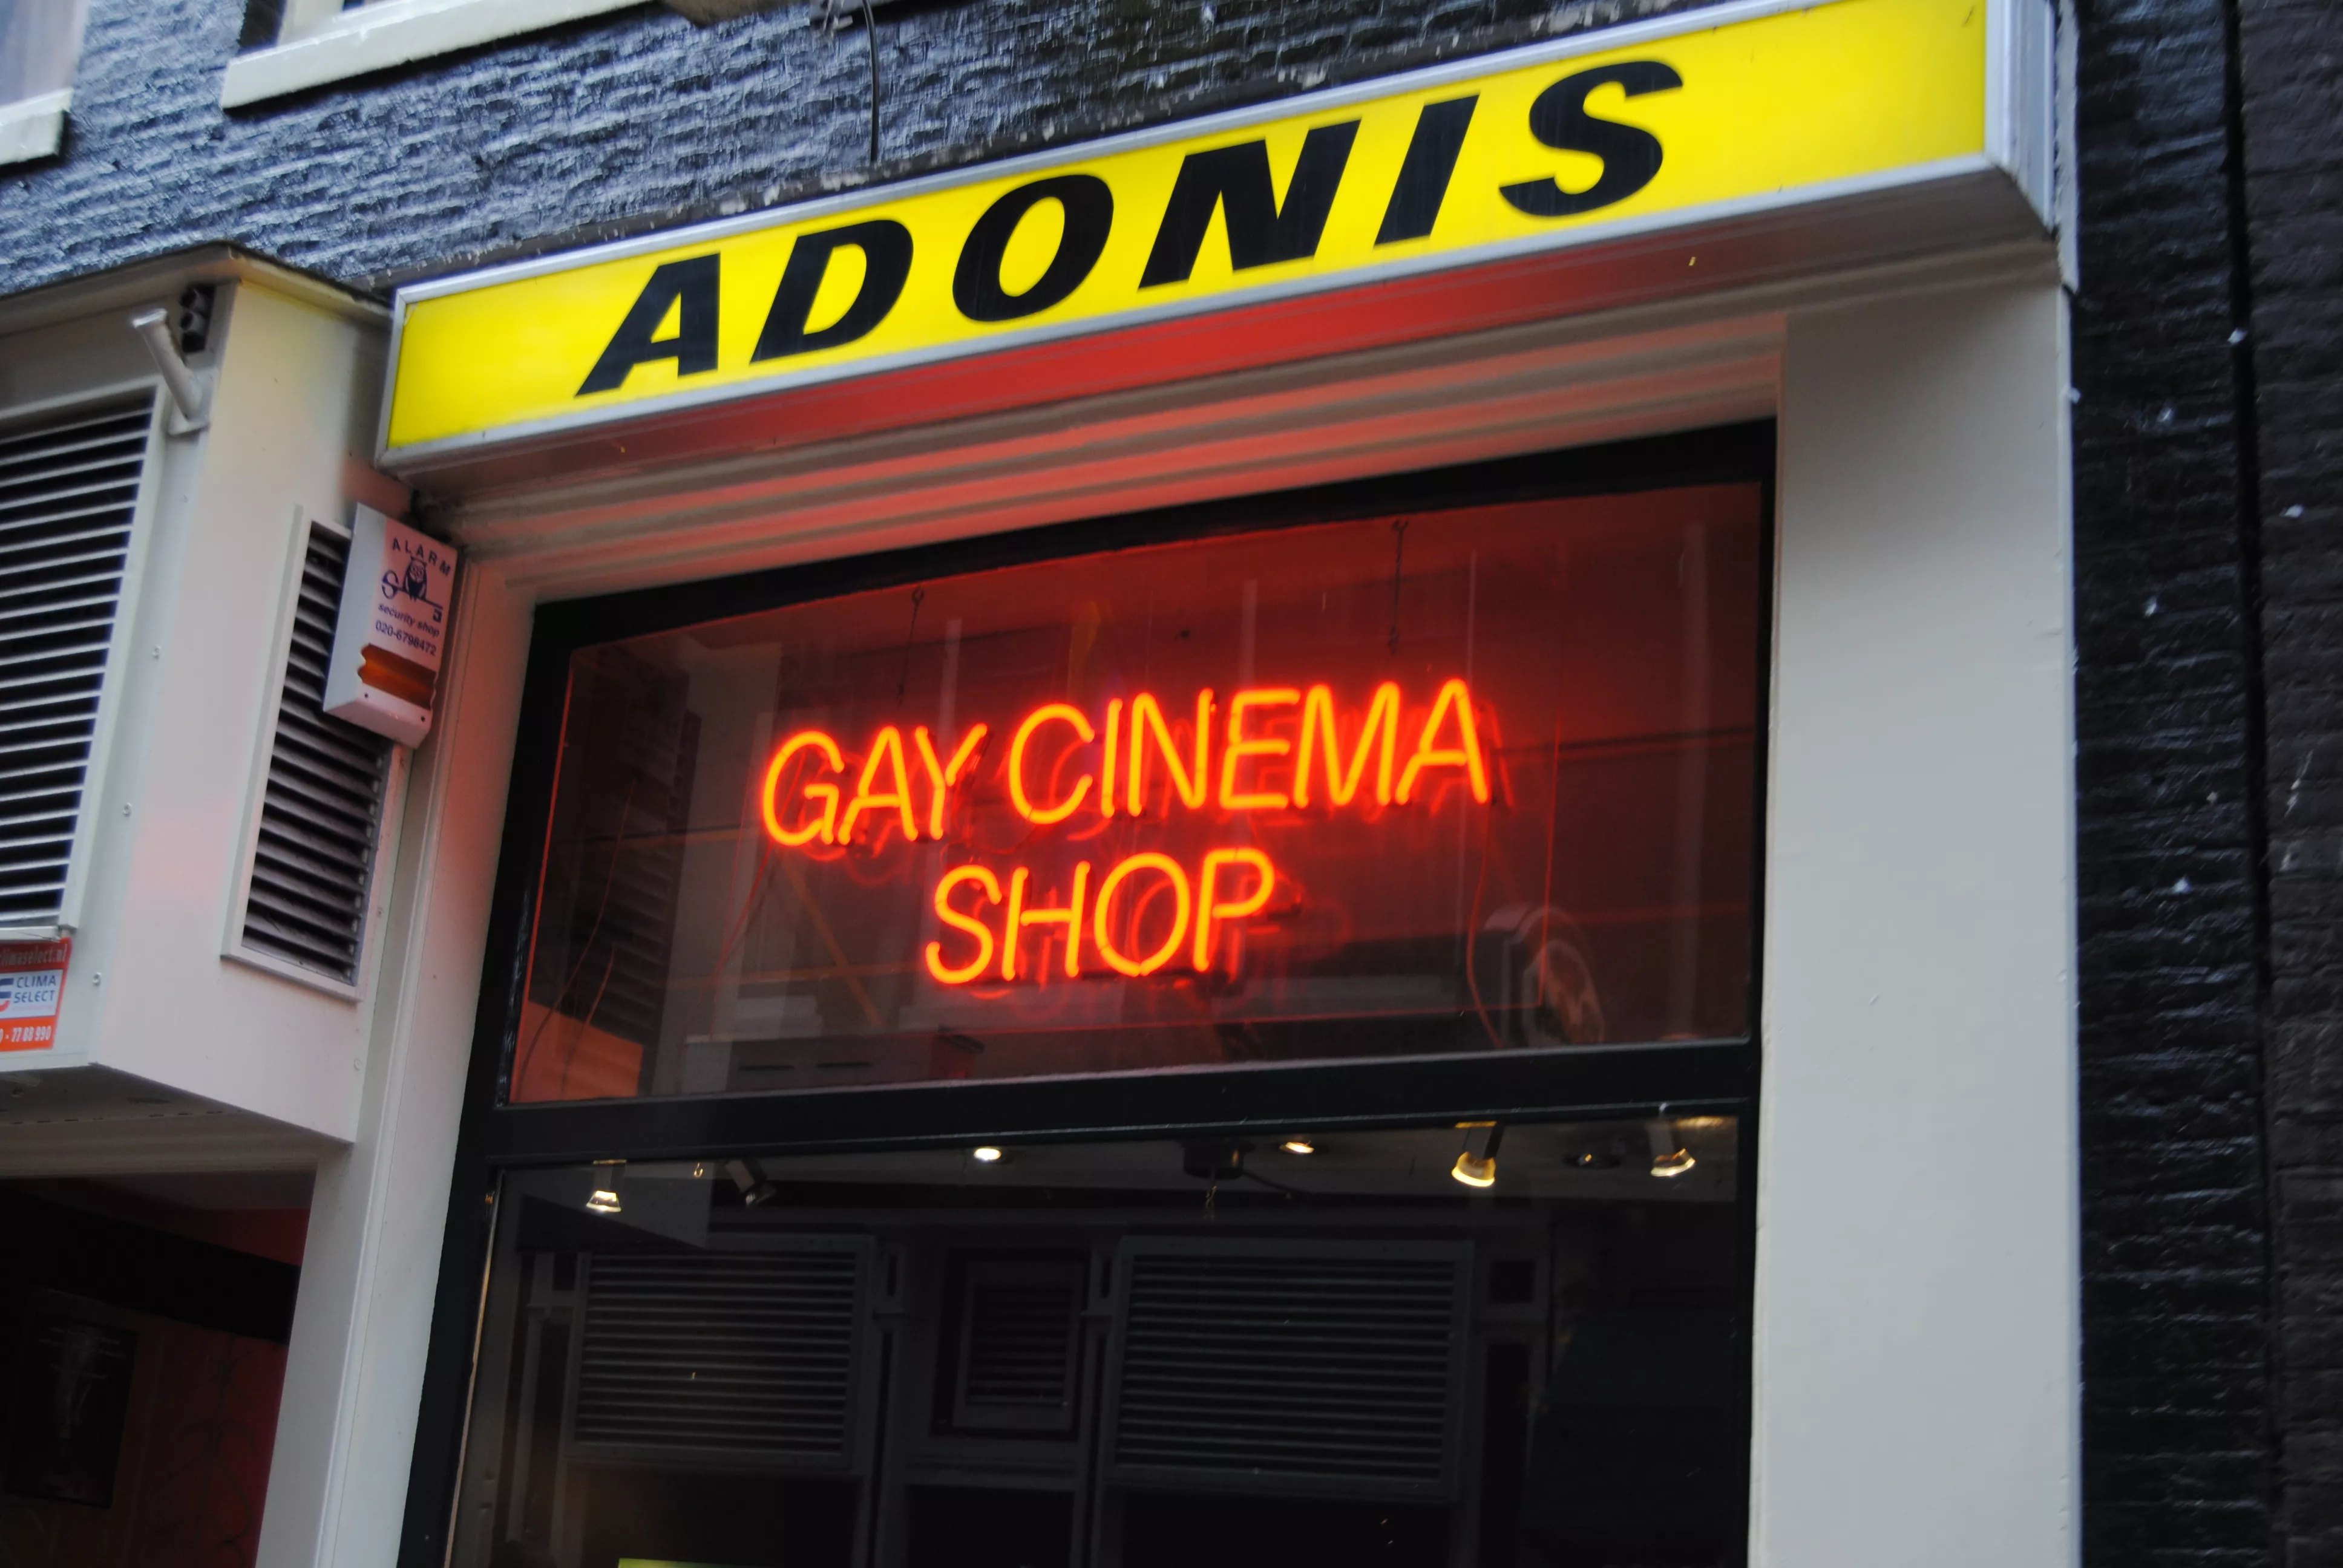 Adonis in Netherlands, Europe  - Rated 0.5